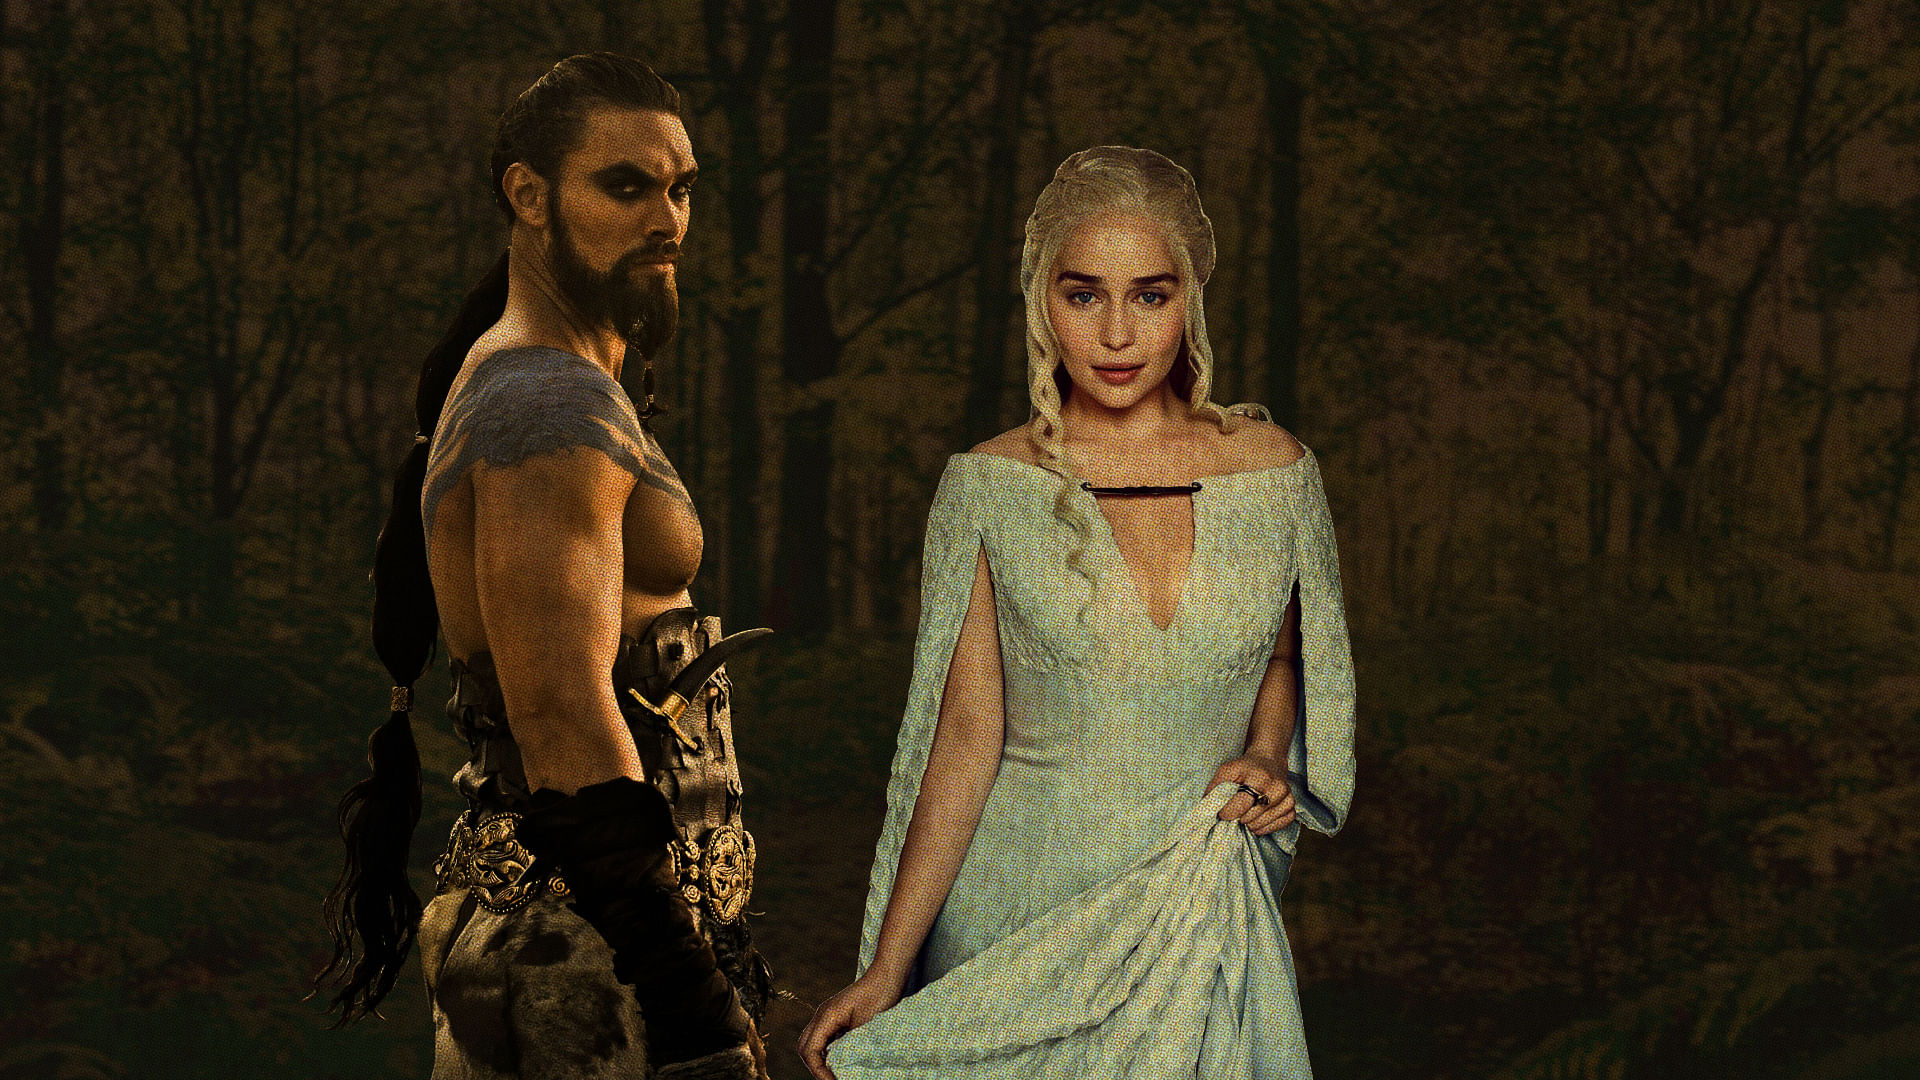 Jason Momoa and Emilia Clarke from ‘Game Of Thrones’